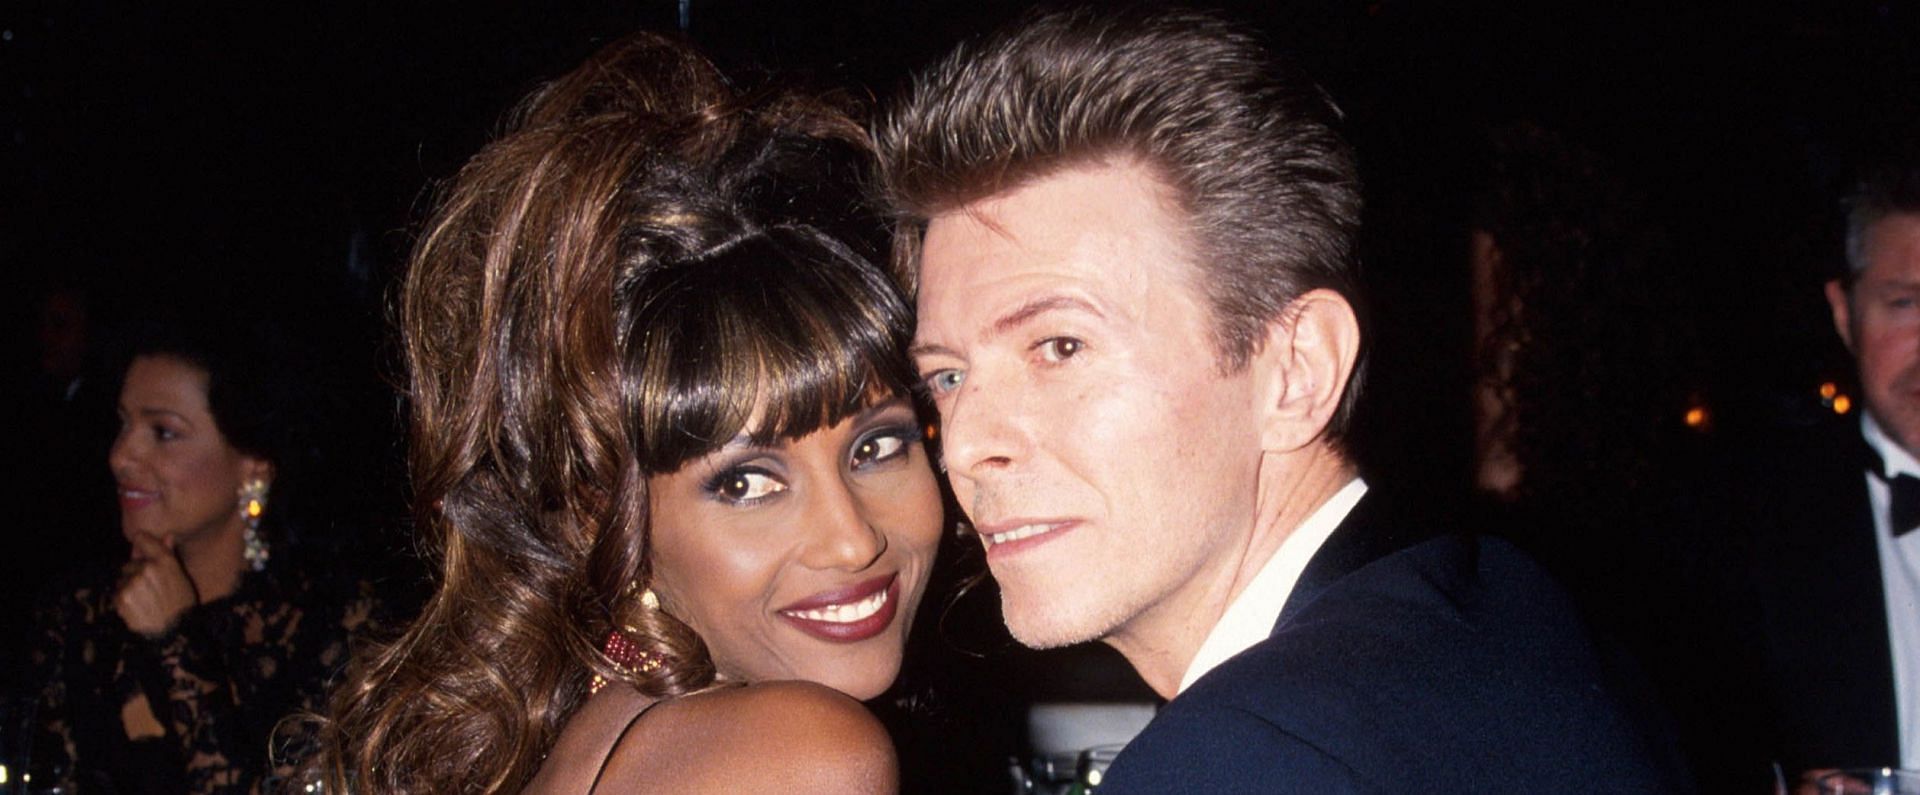 Iman has launched a new Love Memoir fragrance collection in memory of David Bowie (Image via Getty Images)